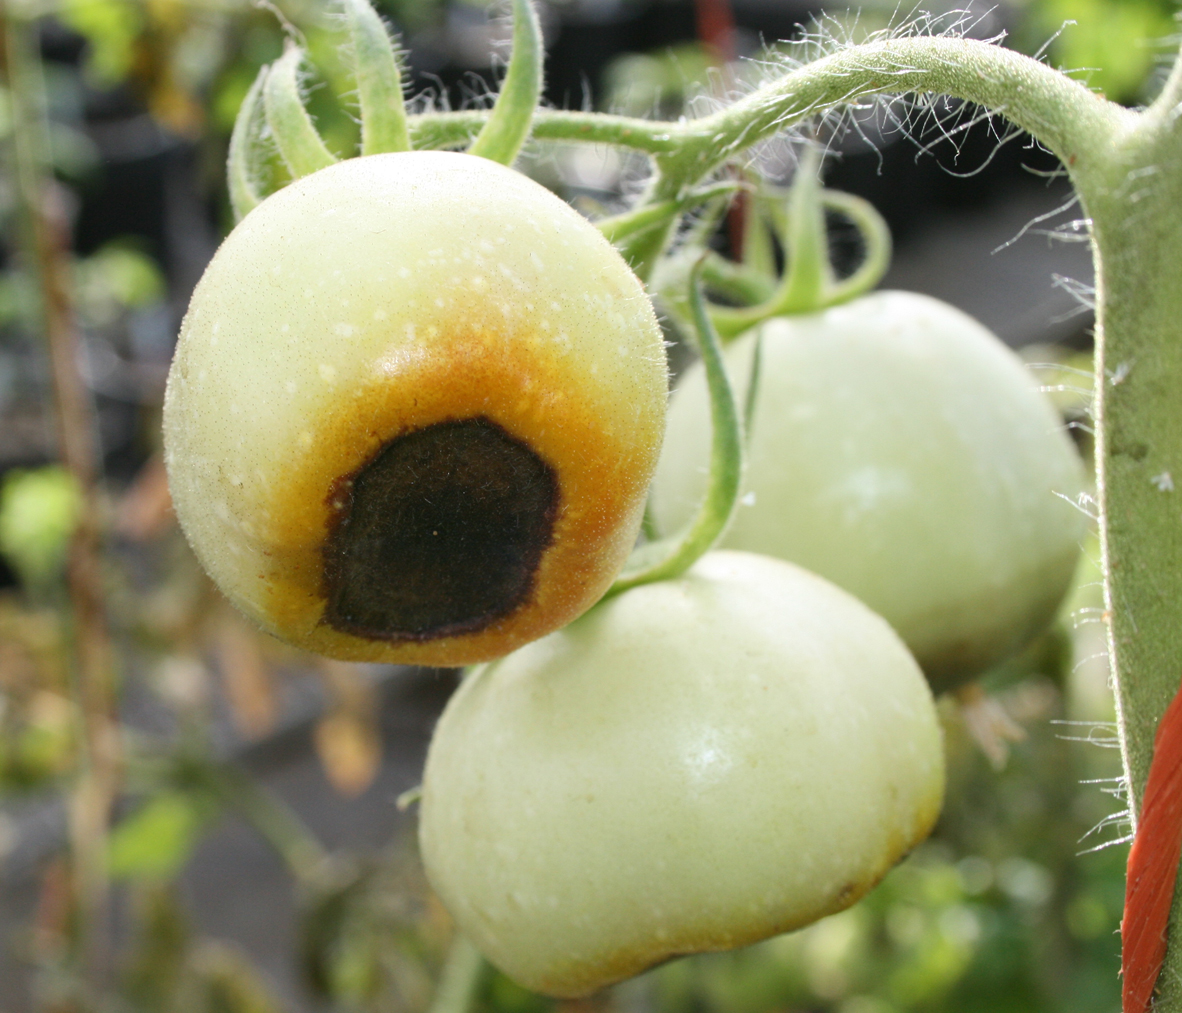 Blossom end rot on tomato.